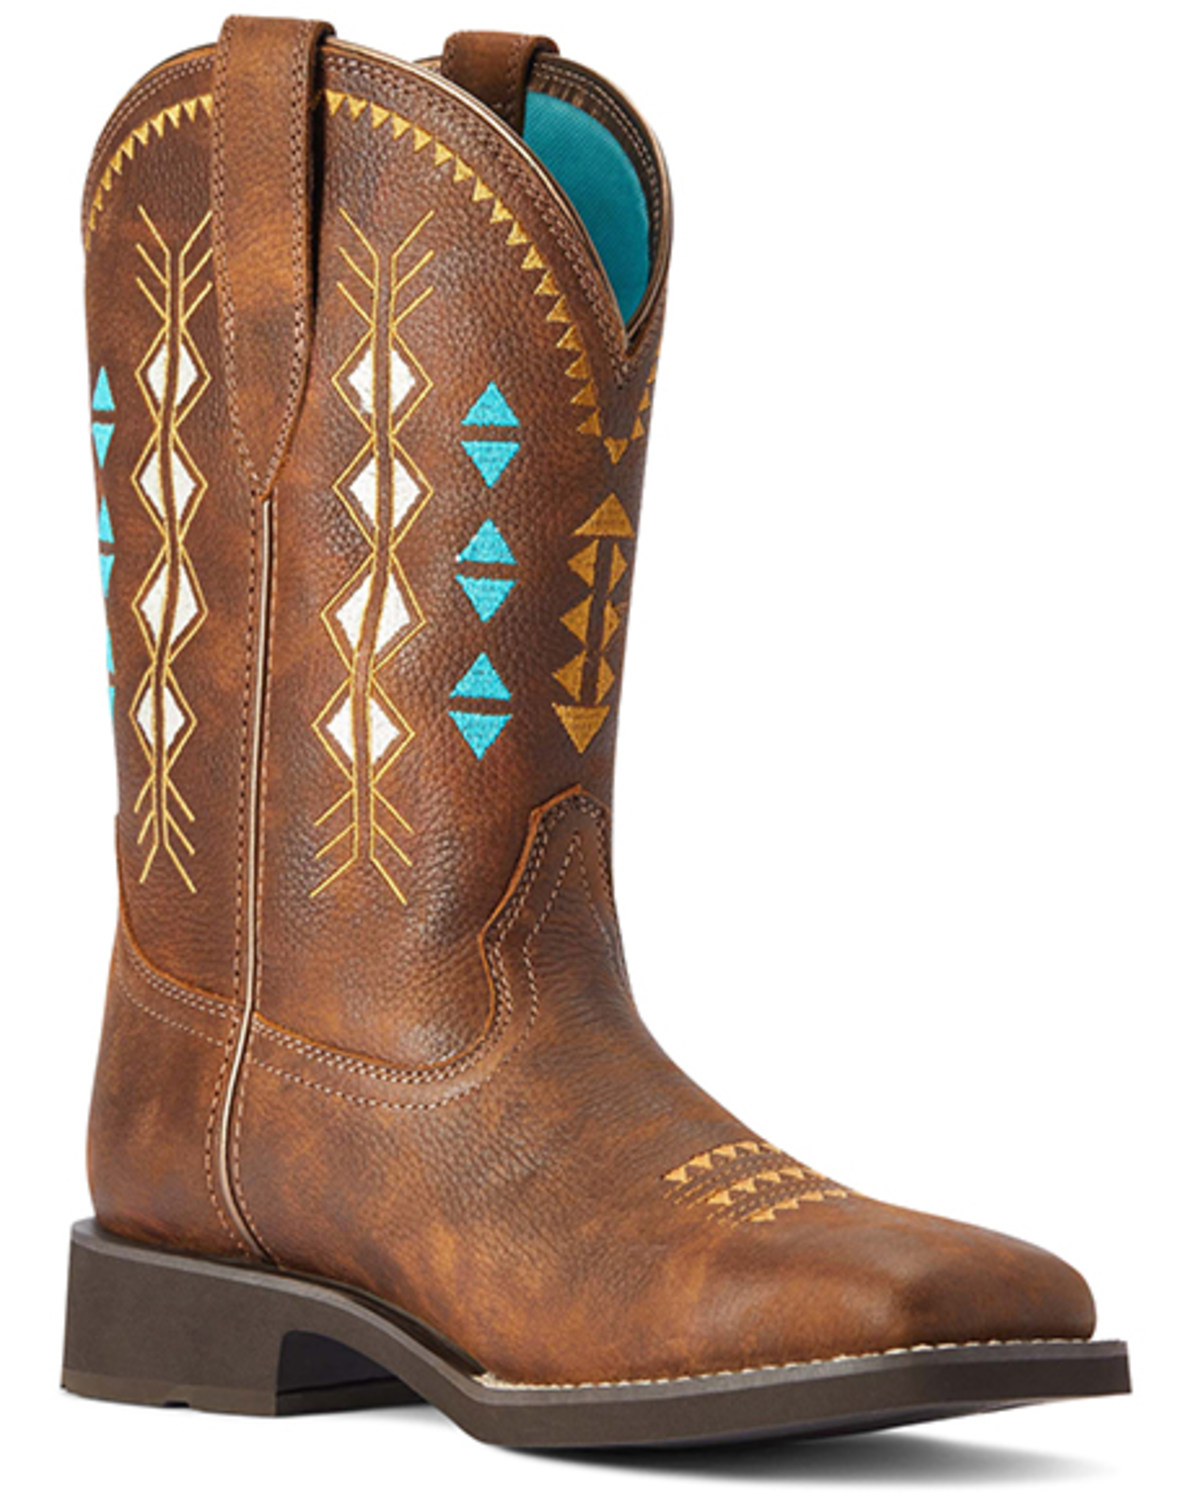 Ariat Women's Delilah Deco Western Boots - Broad Square Toe